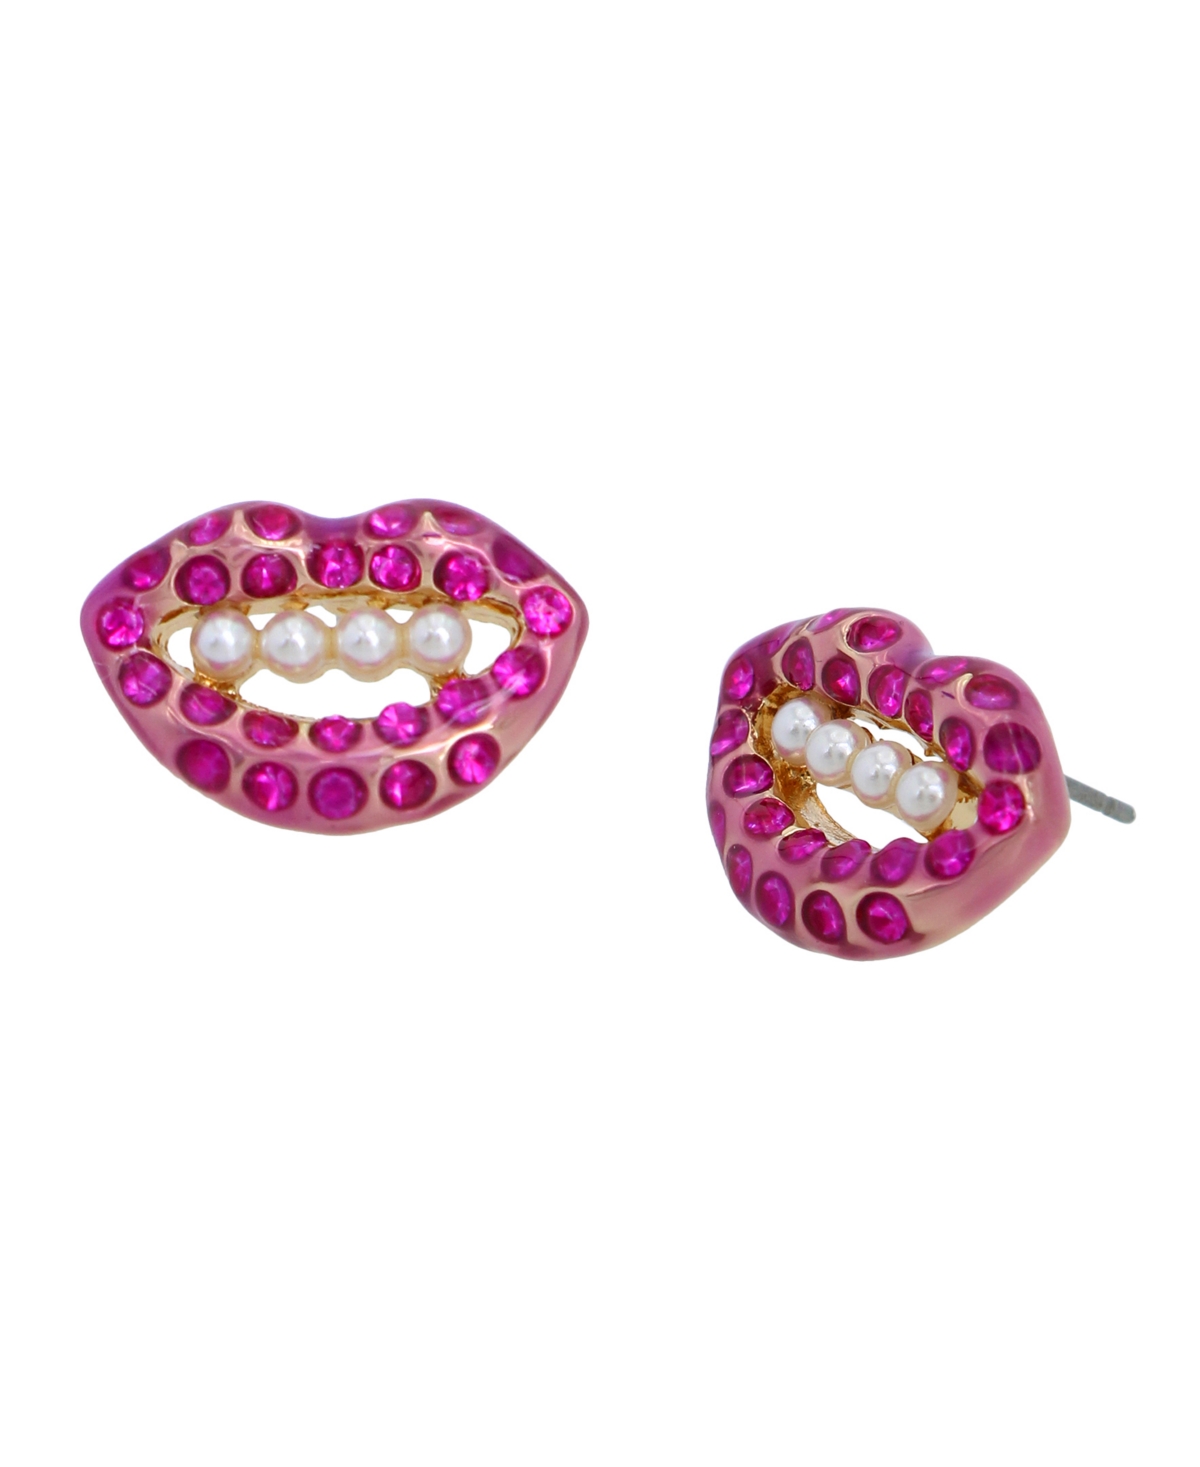 Faux Stone and Imitation Pearl Lips Stud Earrings - Pink, Gold